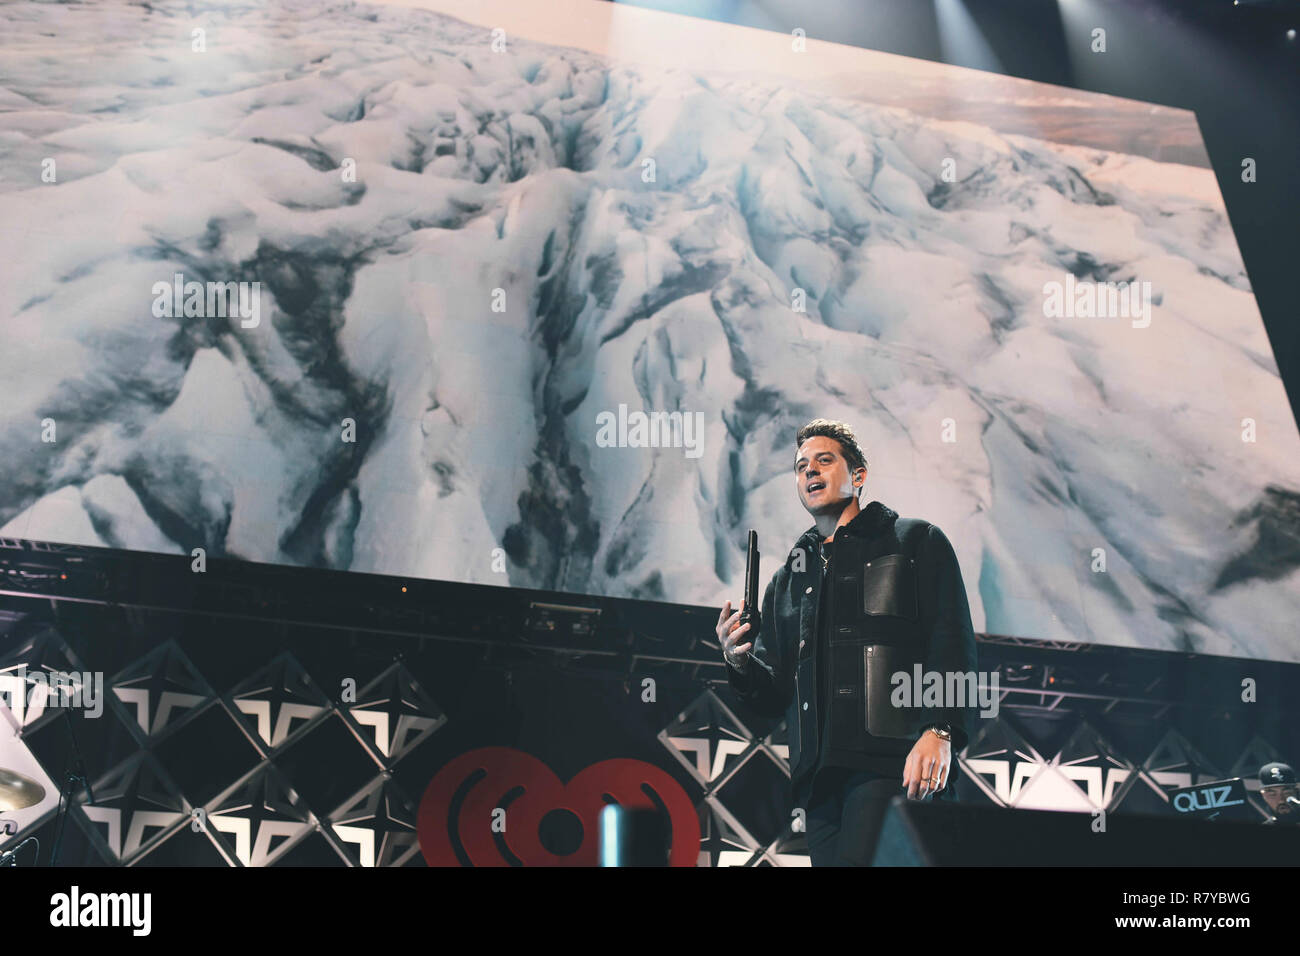 G Eazy At The Iheartradio Jingle Ball At The Td Garden On December